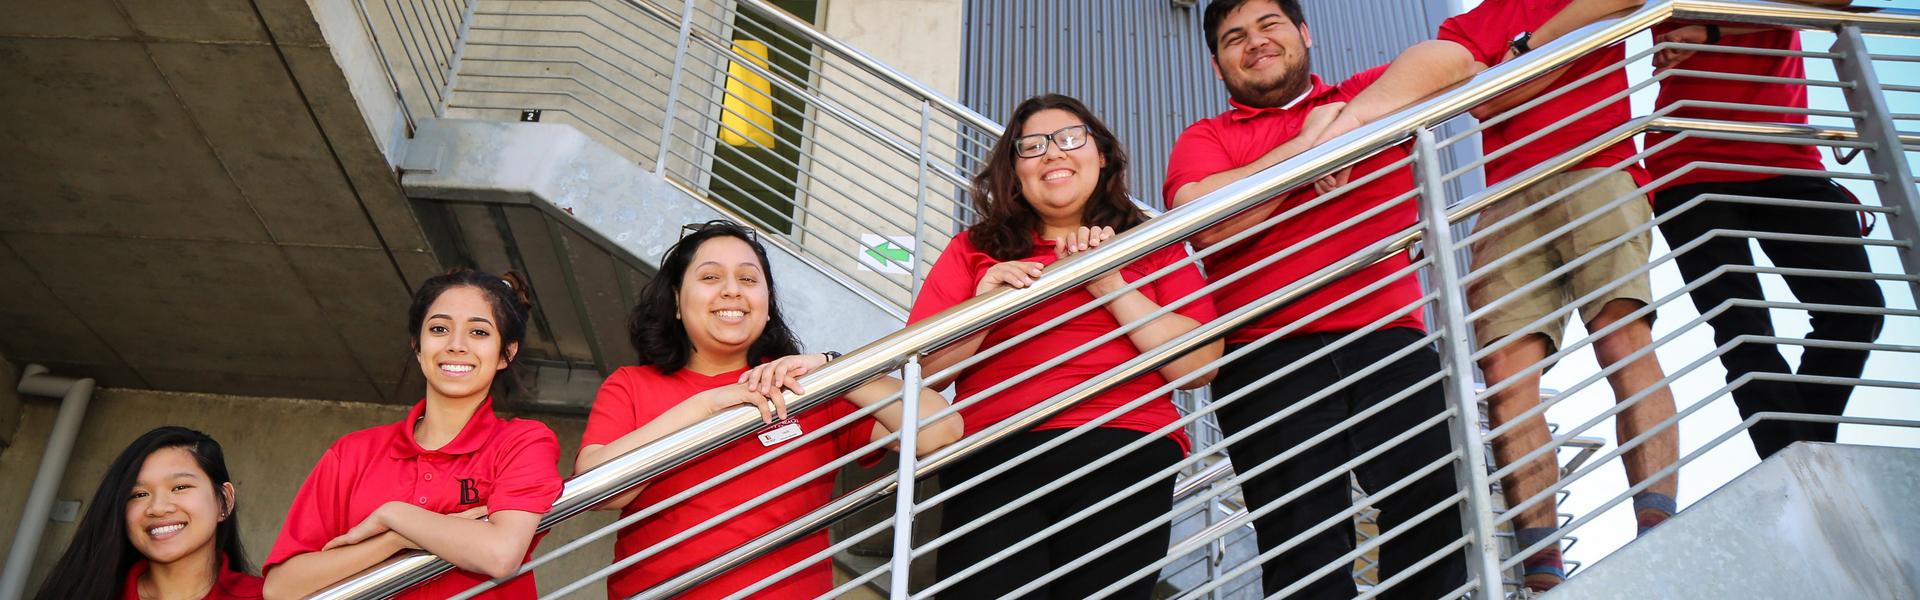 LBCC students standing on a staircase.